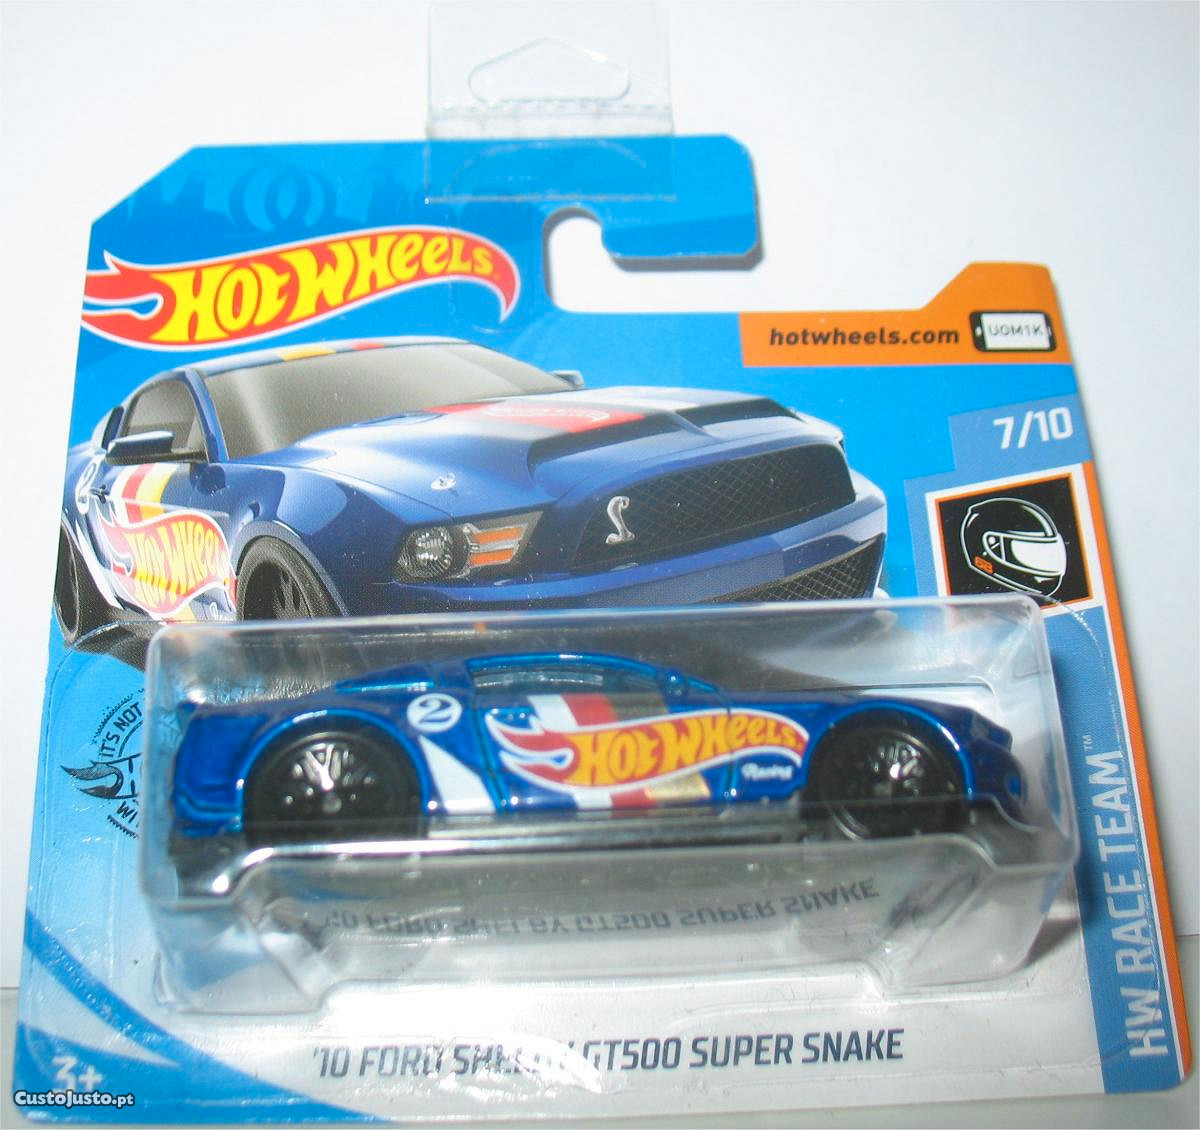 10 Ford Shelby GT500 Super Snake (2019-Hot Wheels)